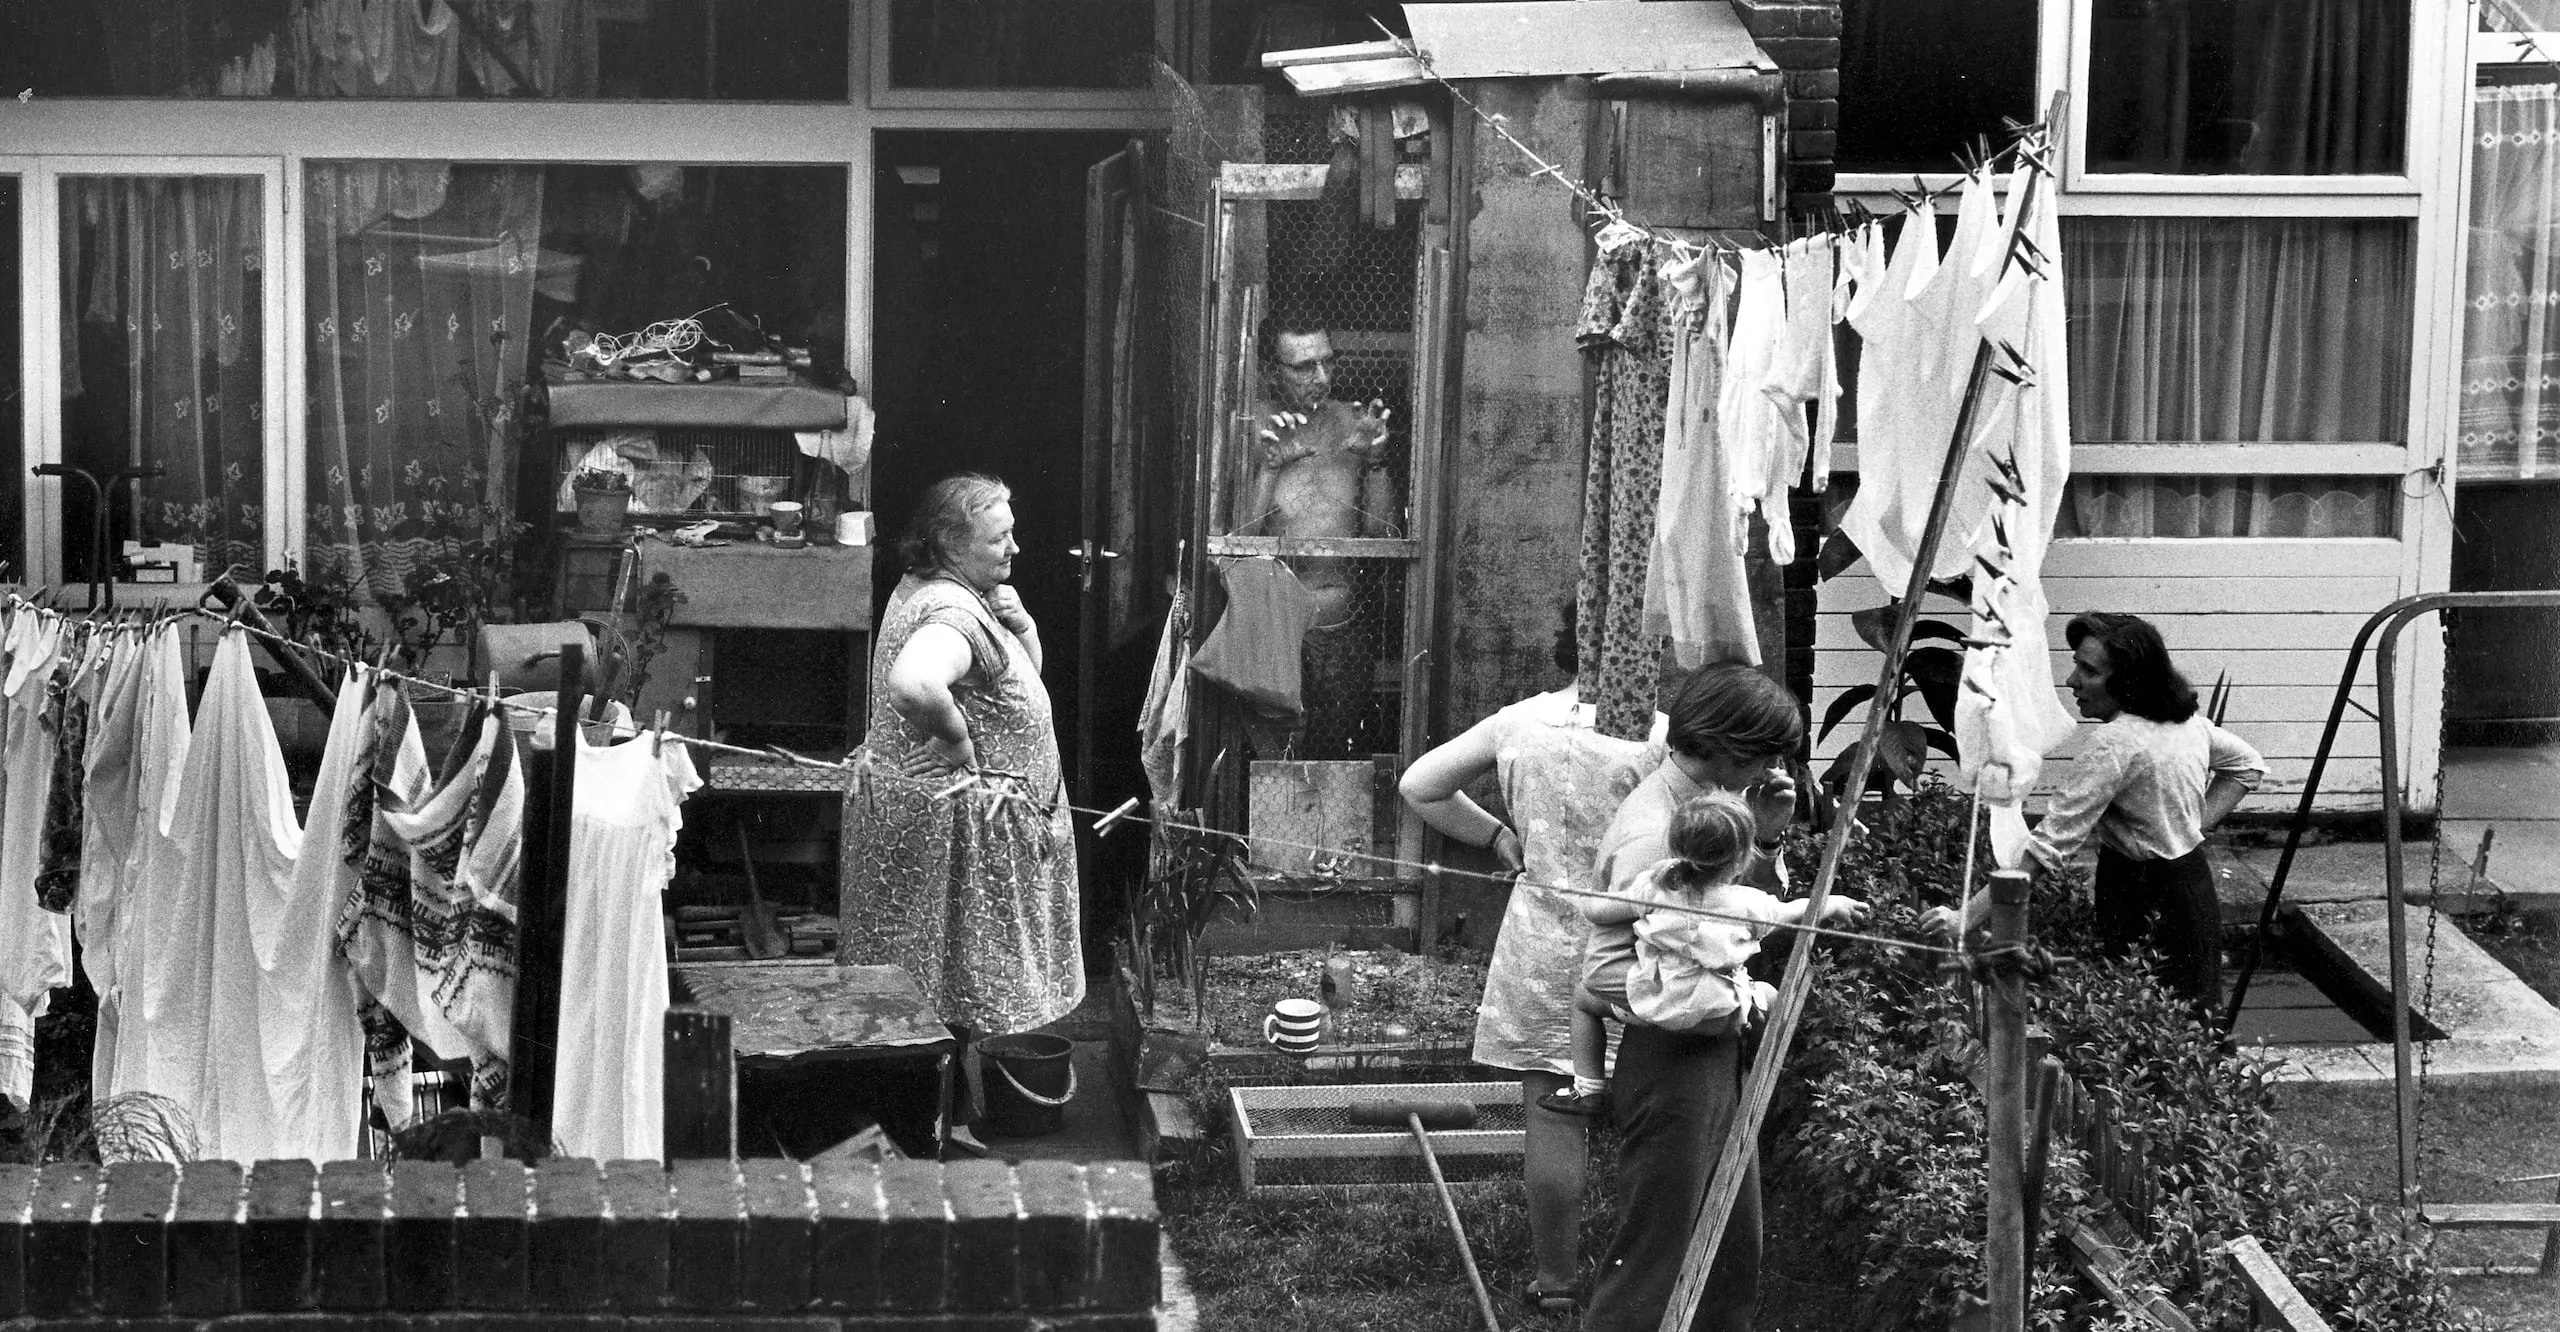 Black and white photograph of families talking over their shared low garden wall with laundry hanging.